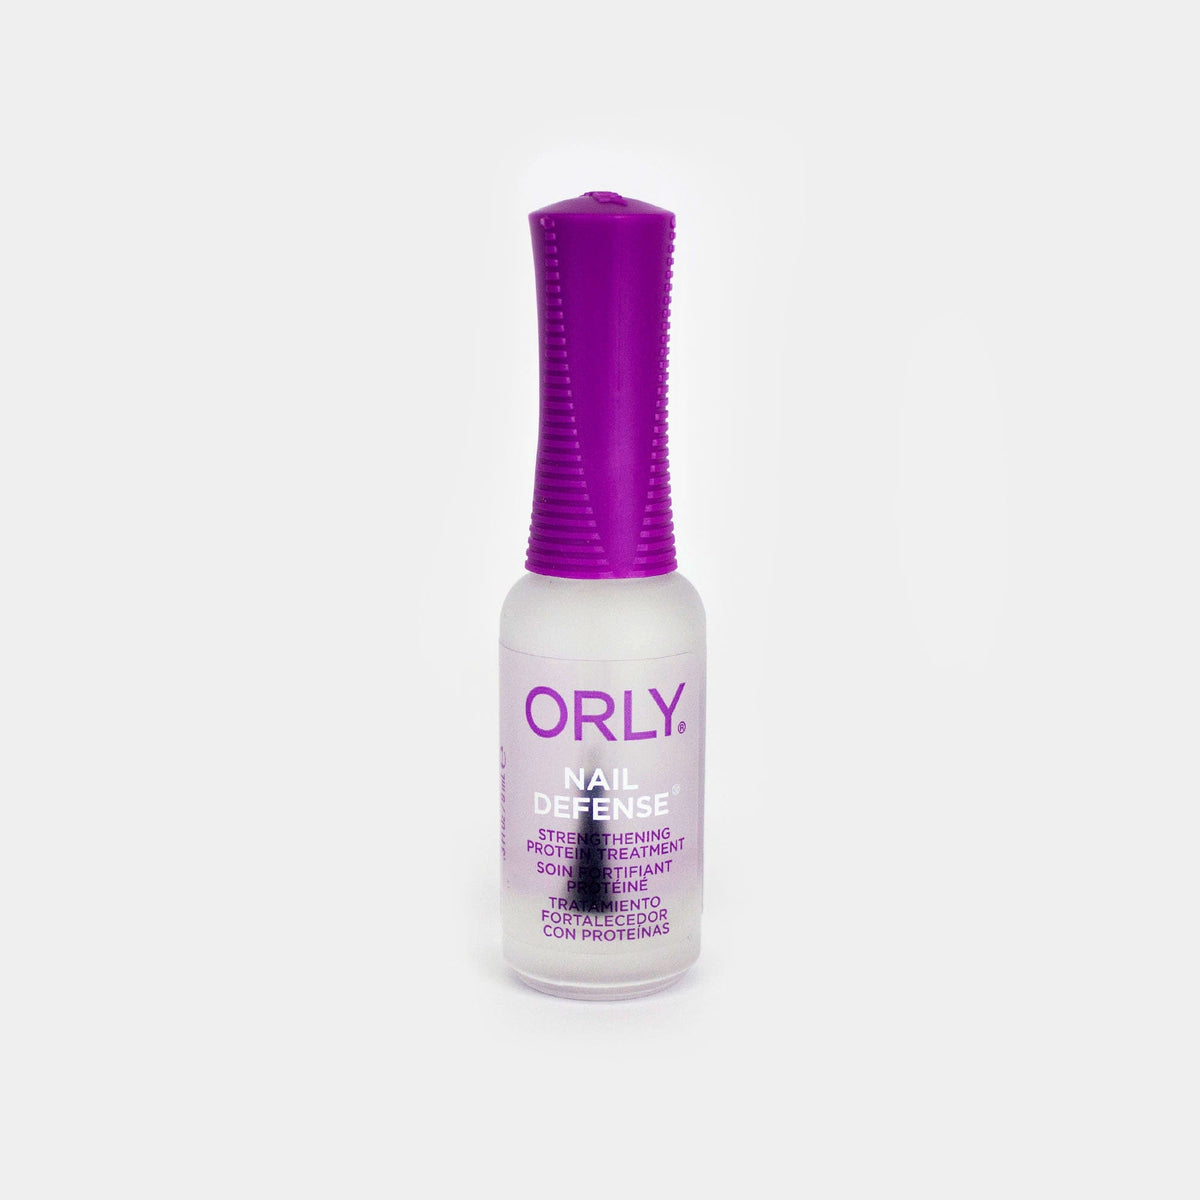 Orly Nail Defense 9mL product photo - photographed in Europe